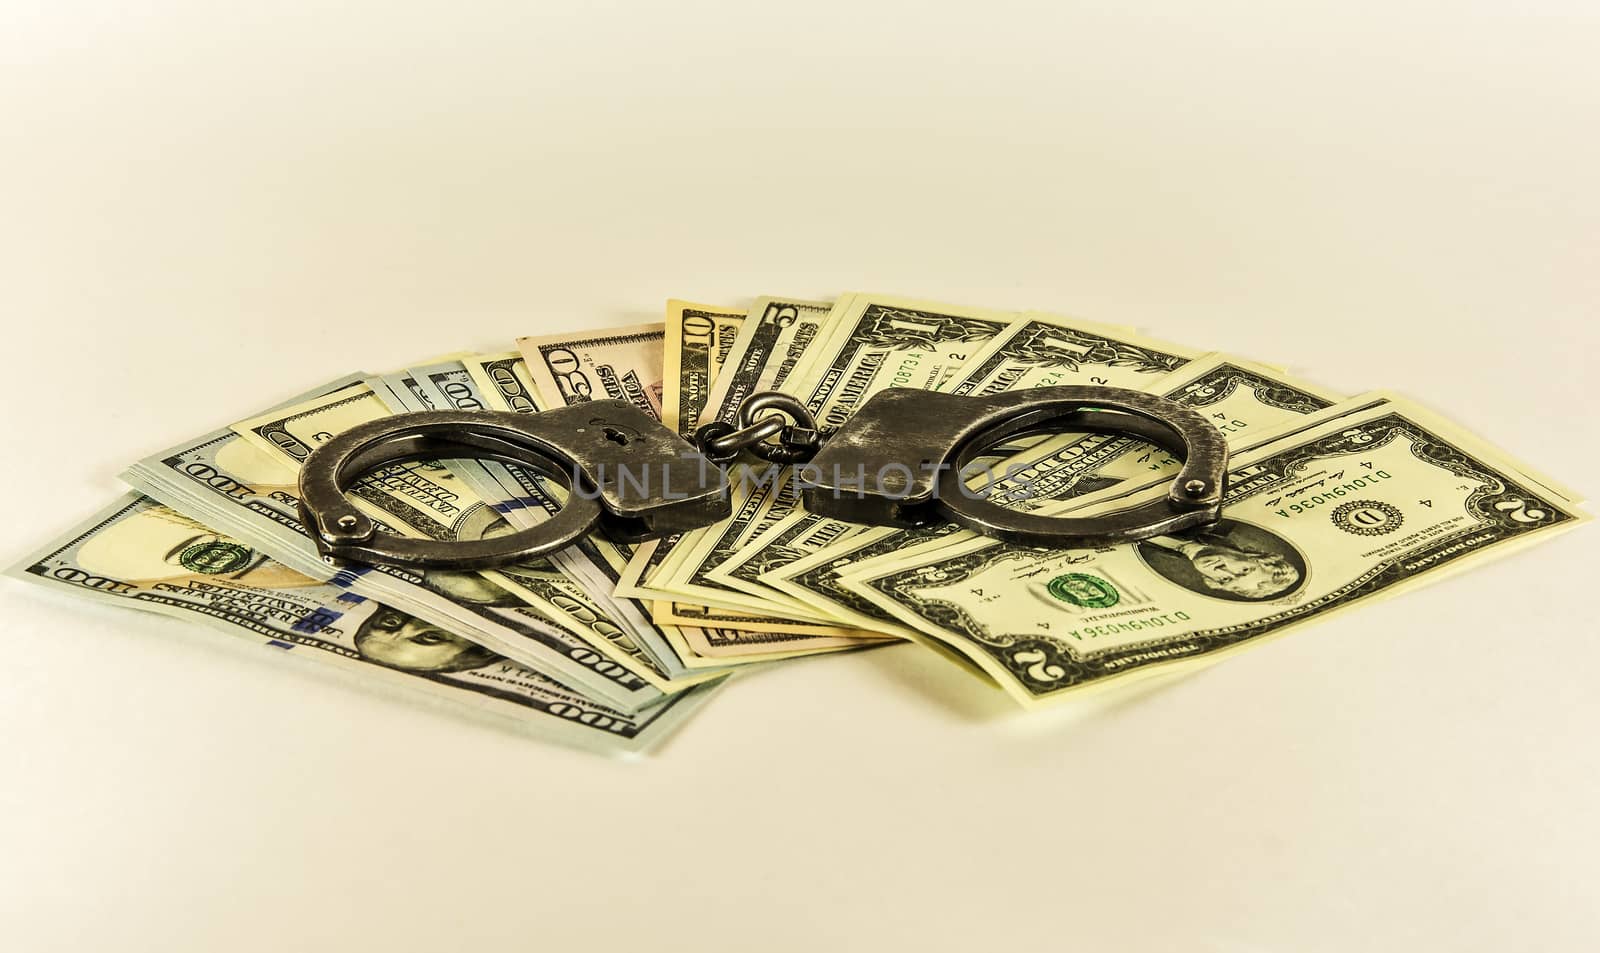 Metal handcuffs on the banknotes of US dollars by Grommik